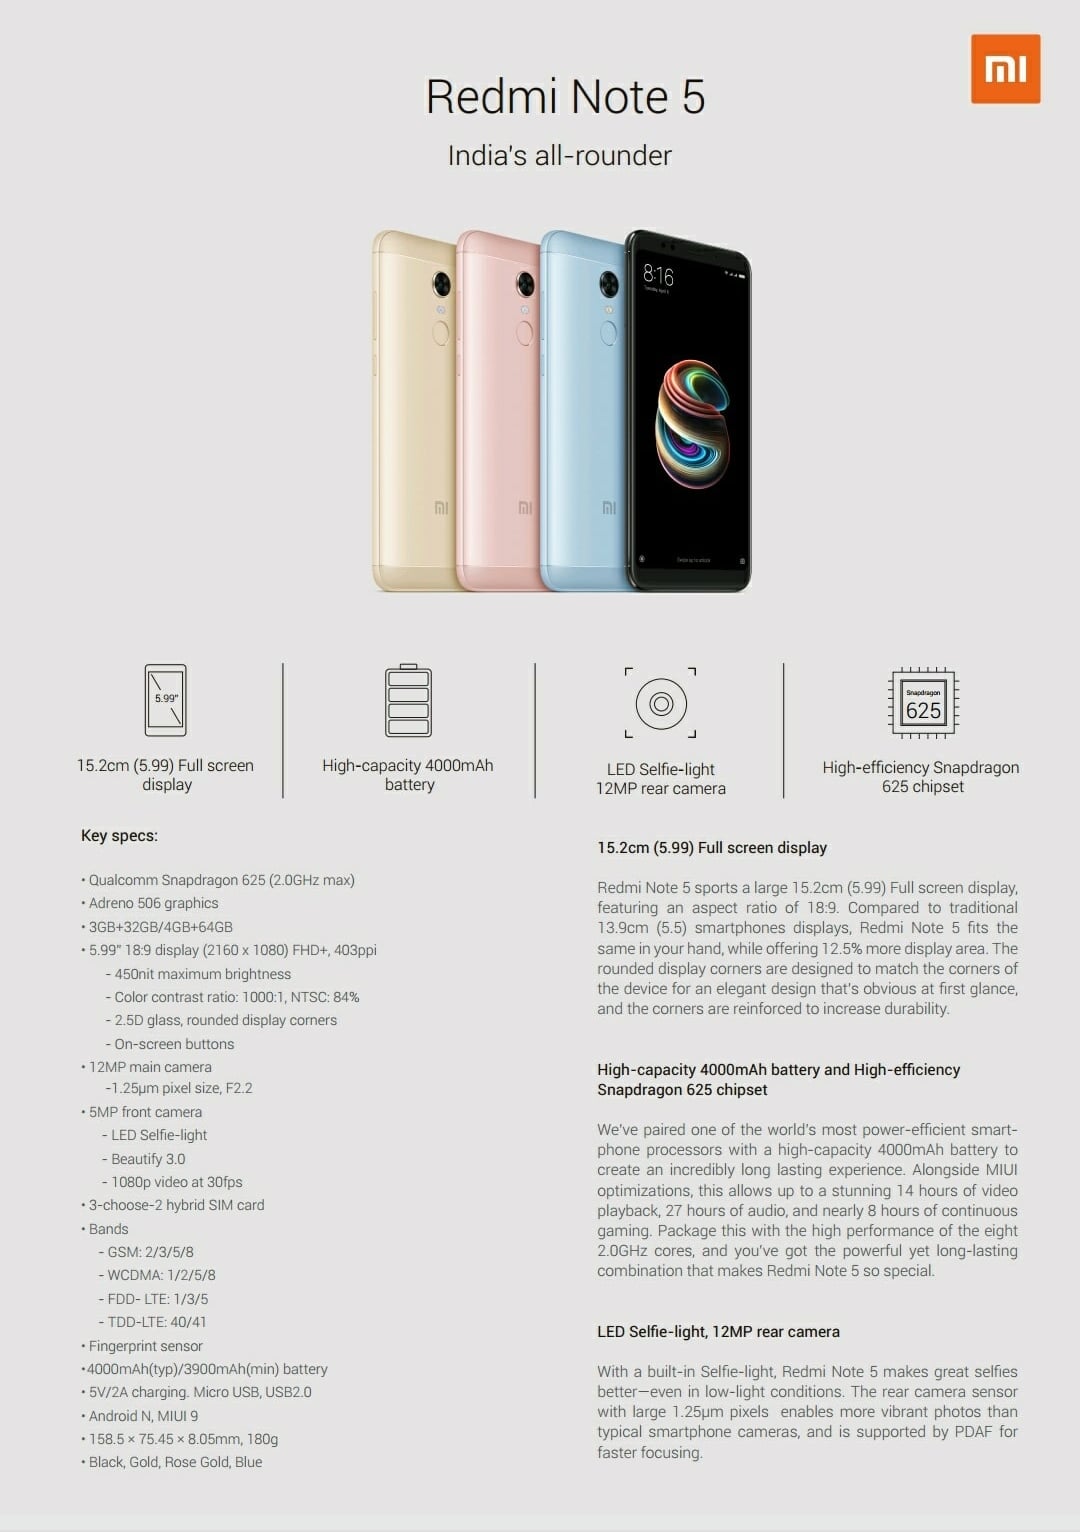 India' All-rounder "Redmi Note 5" specifications and available colors